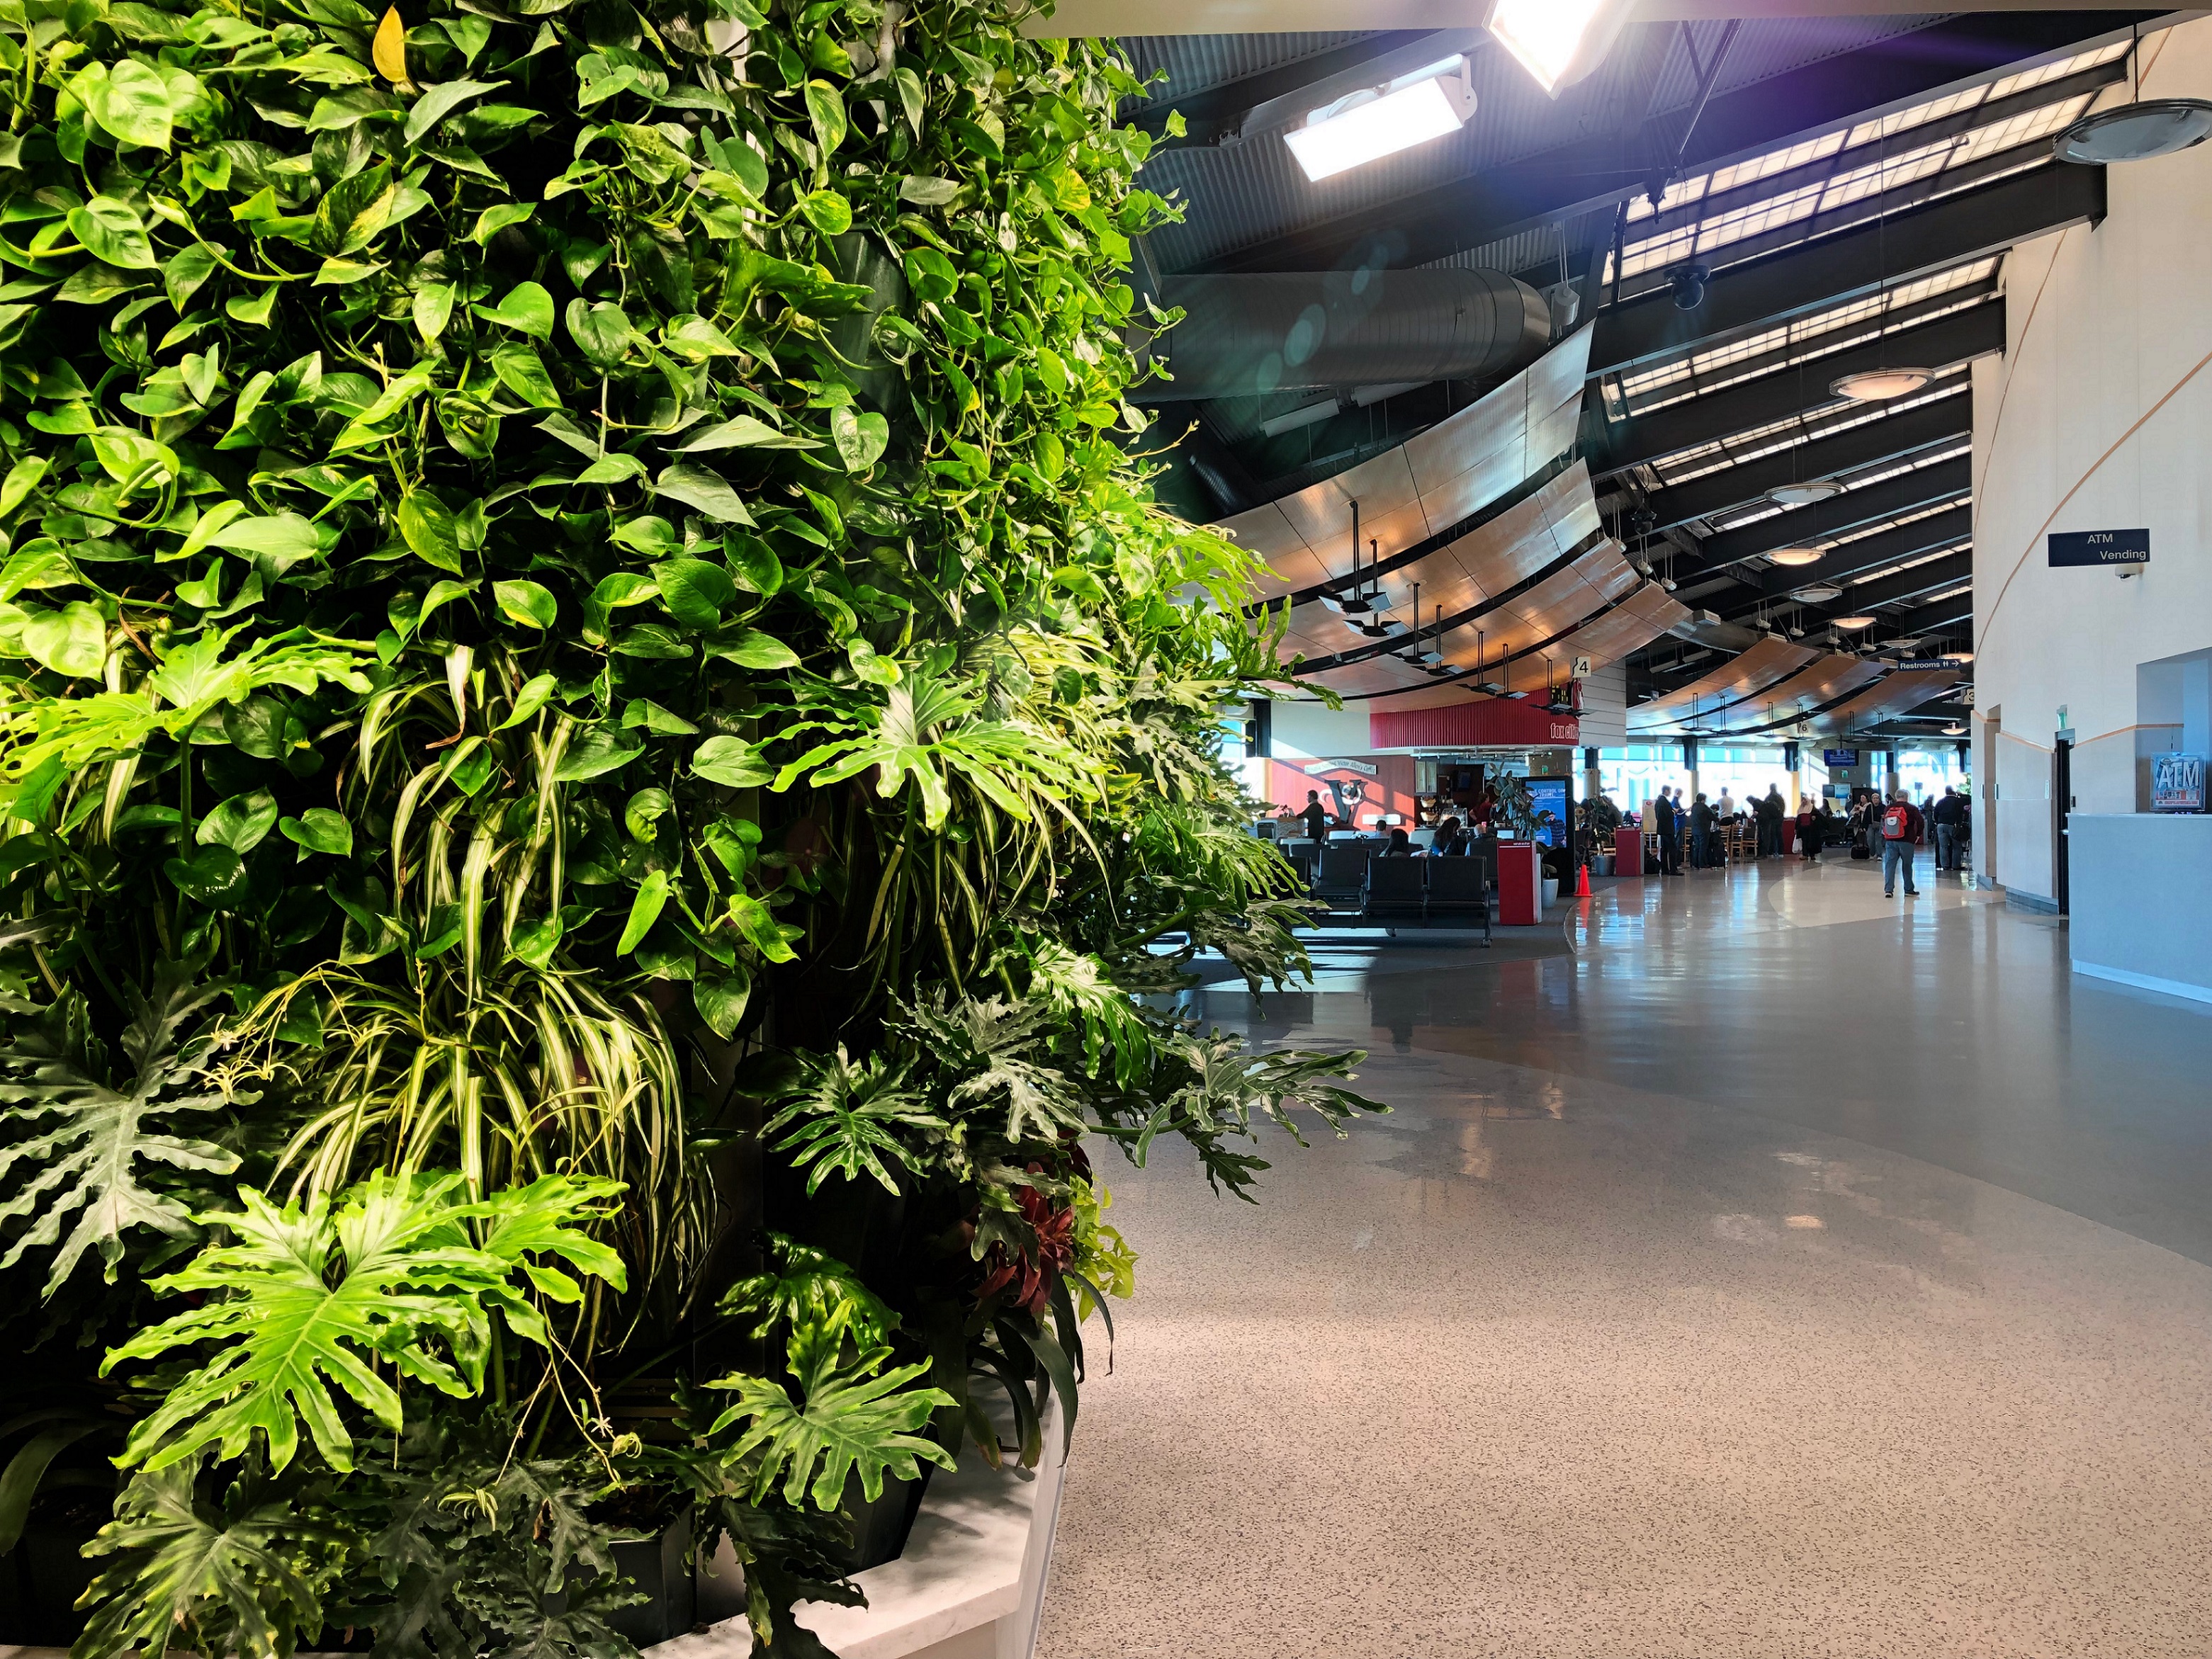 The vibrant tropical plants in the living wall provide a calming, natural atmosphere for travelers.